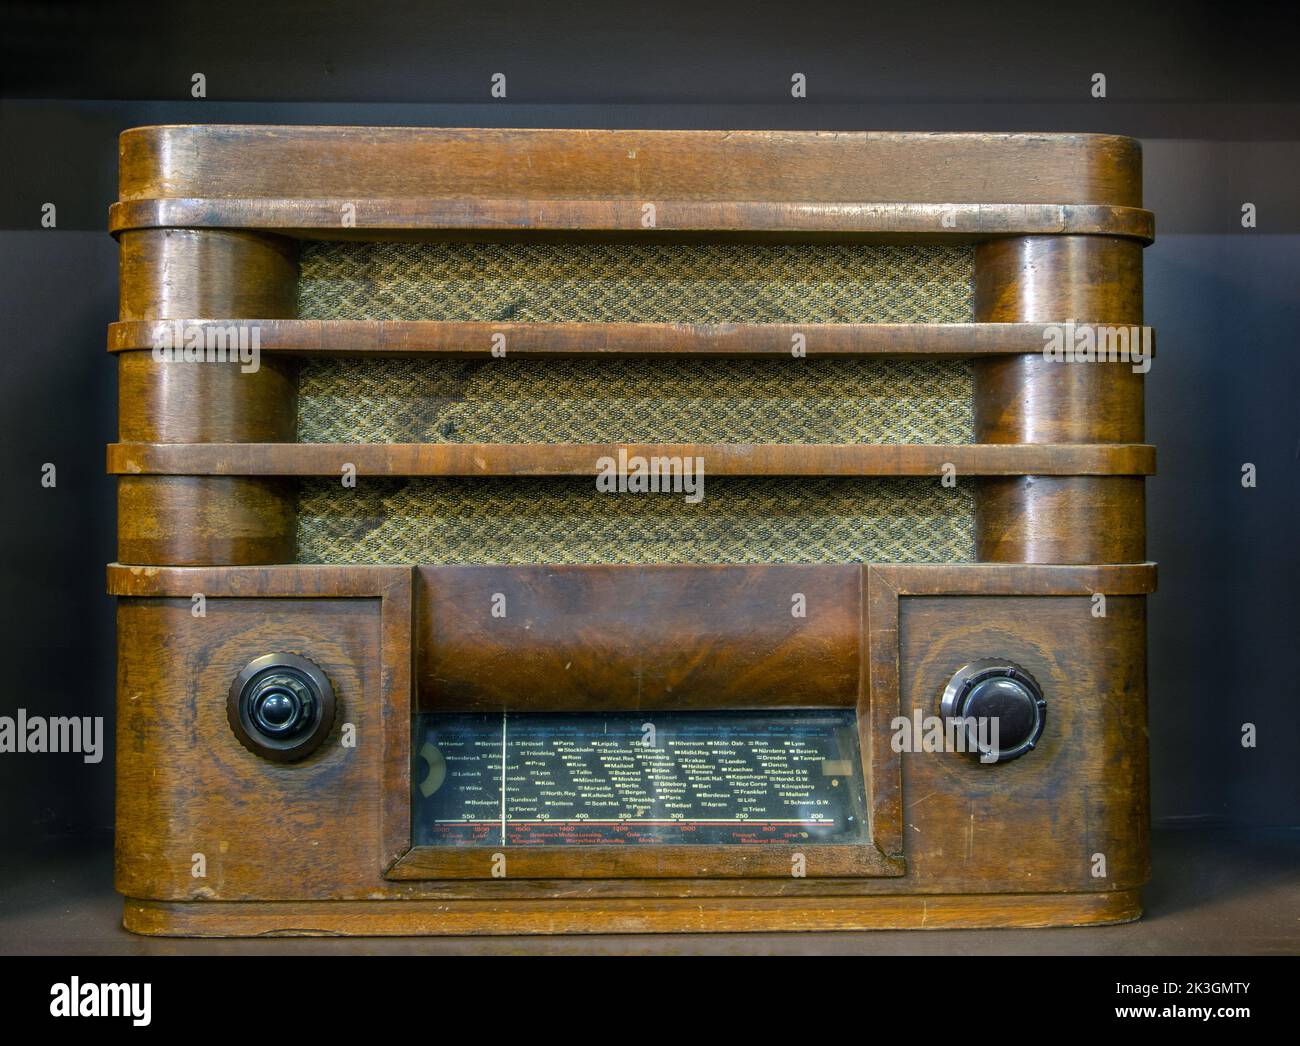 The old radio is on the cabinet Stock Photo